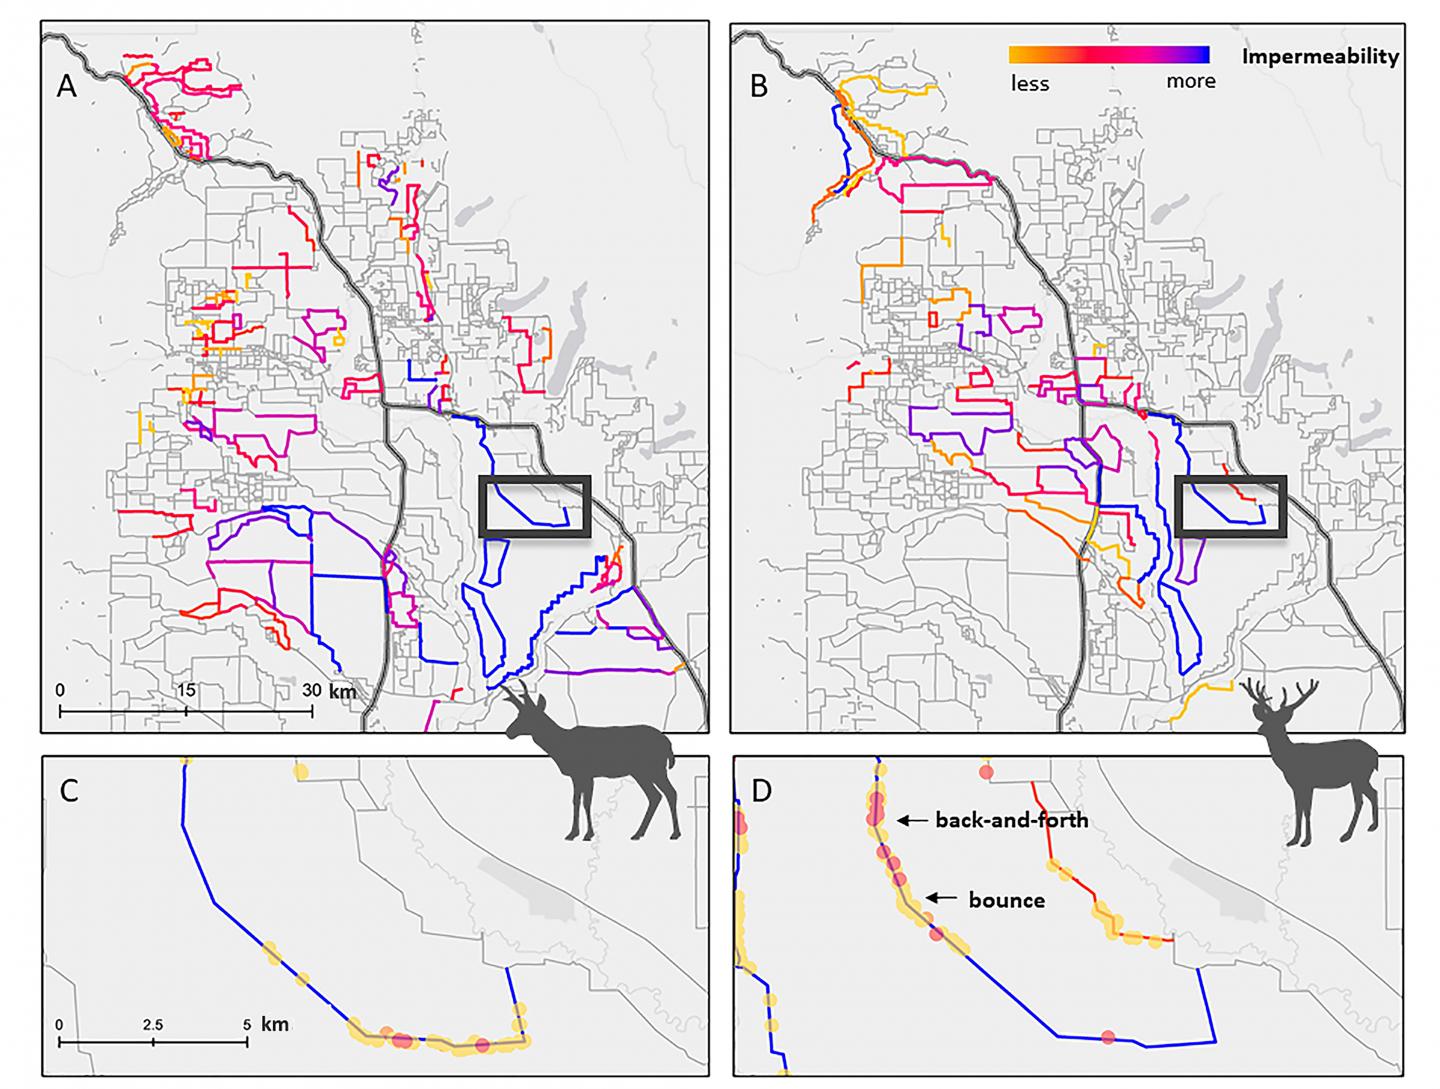 Research highlights maps that inhibit migratory wildlife